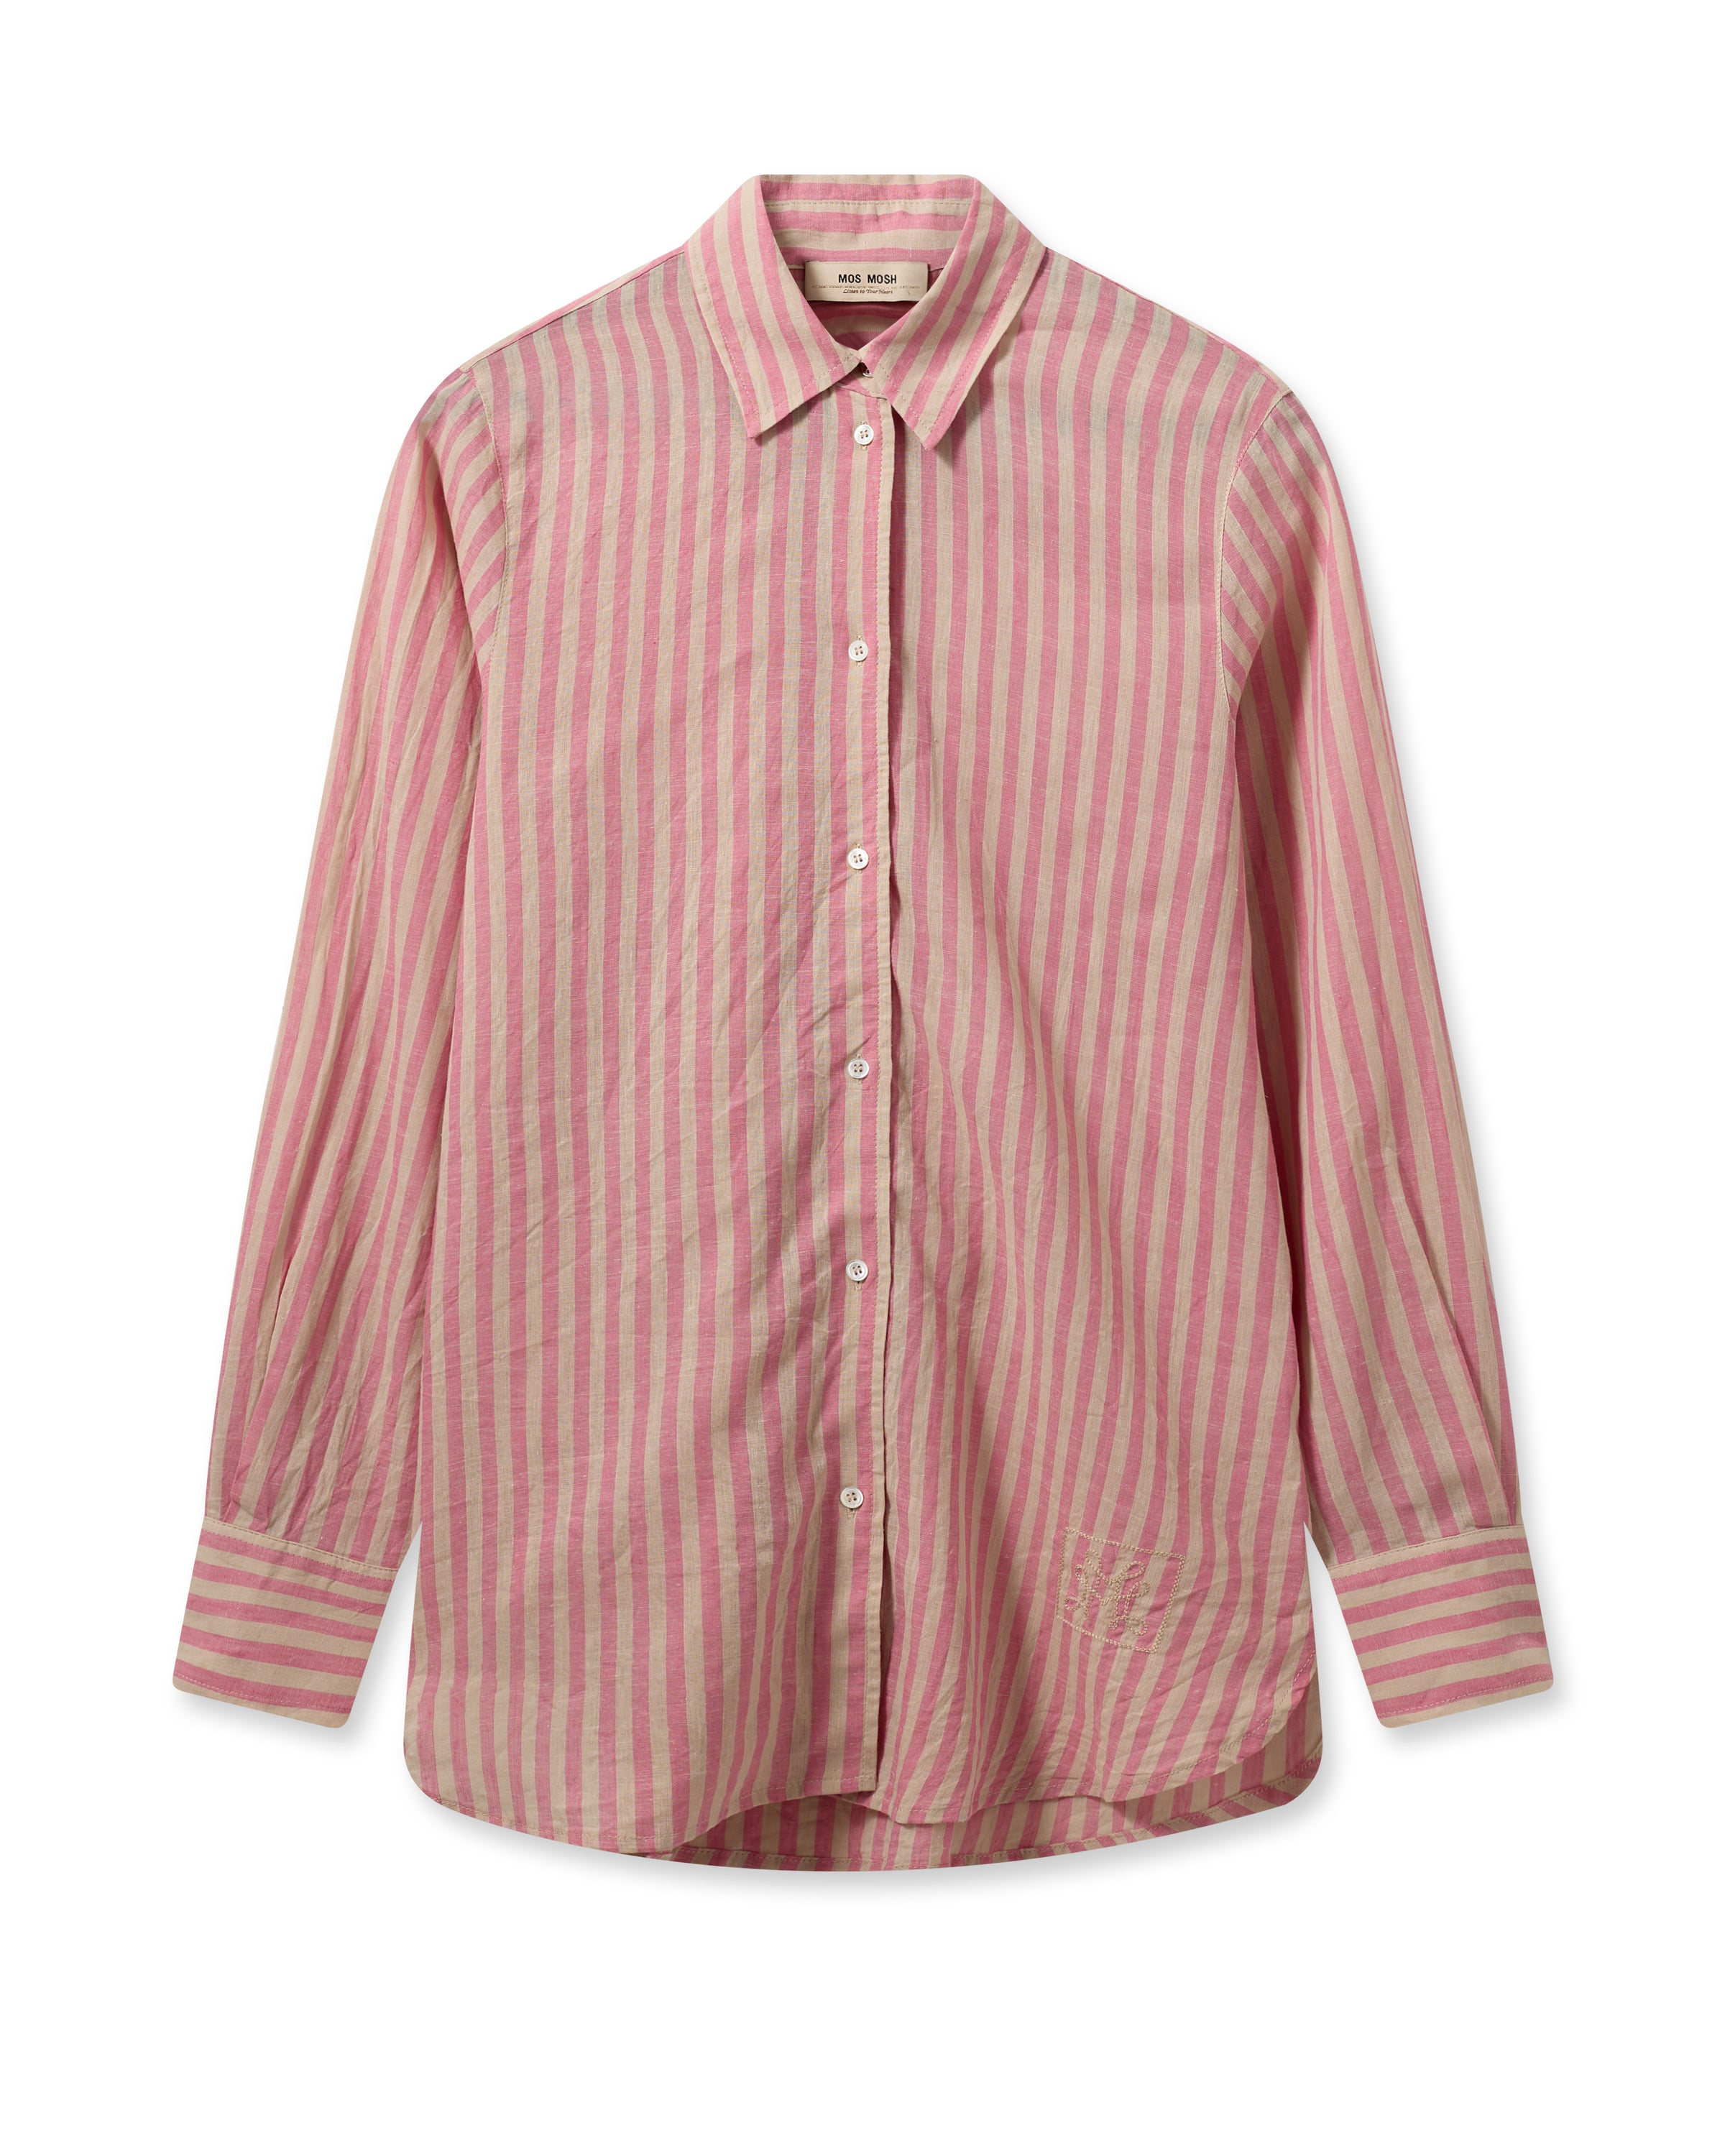 Pink and taupe striped shirt in cotton and linen blend